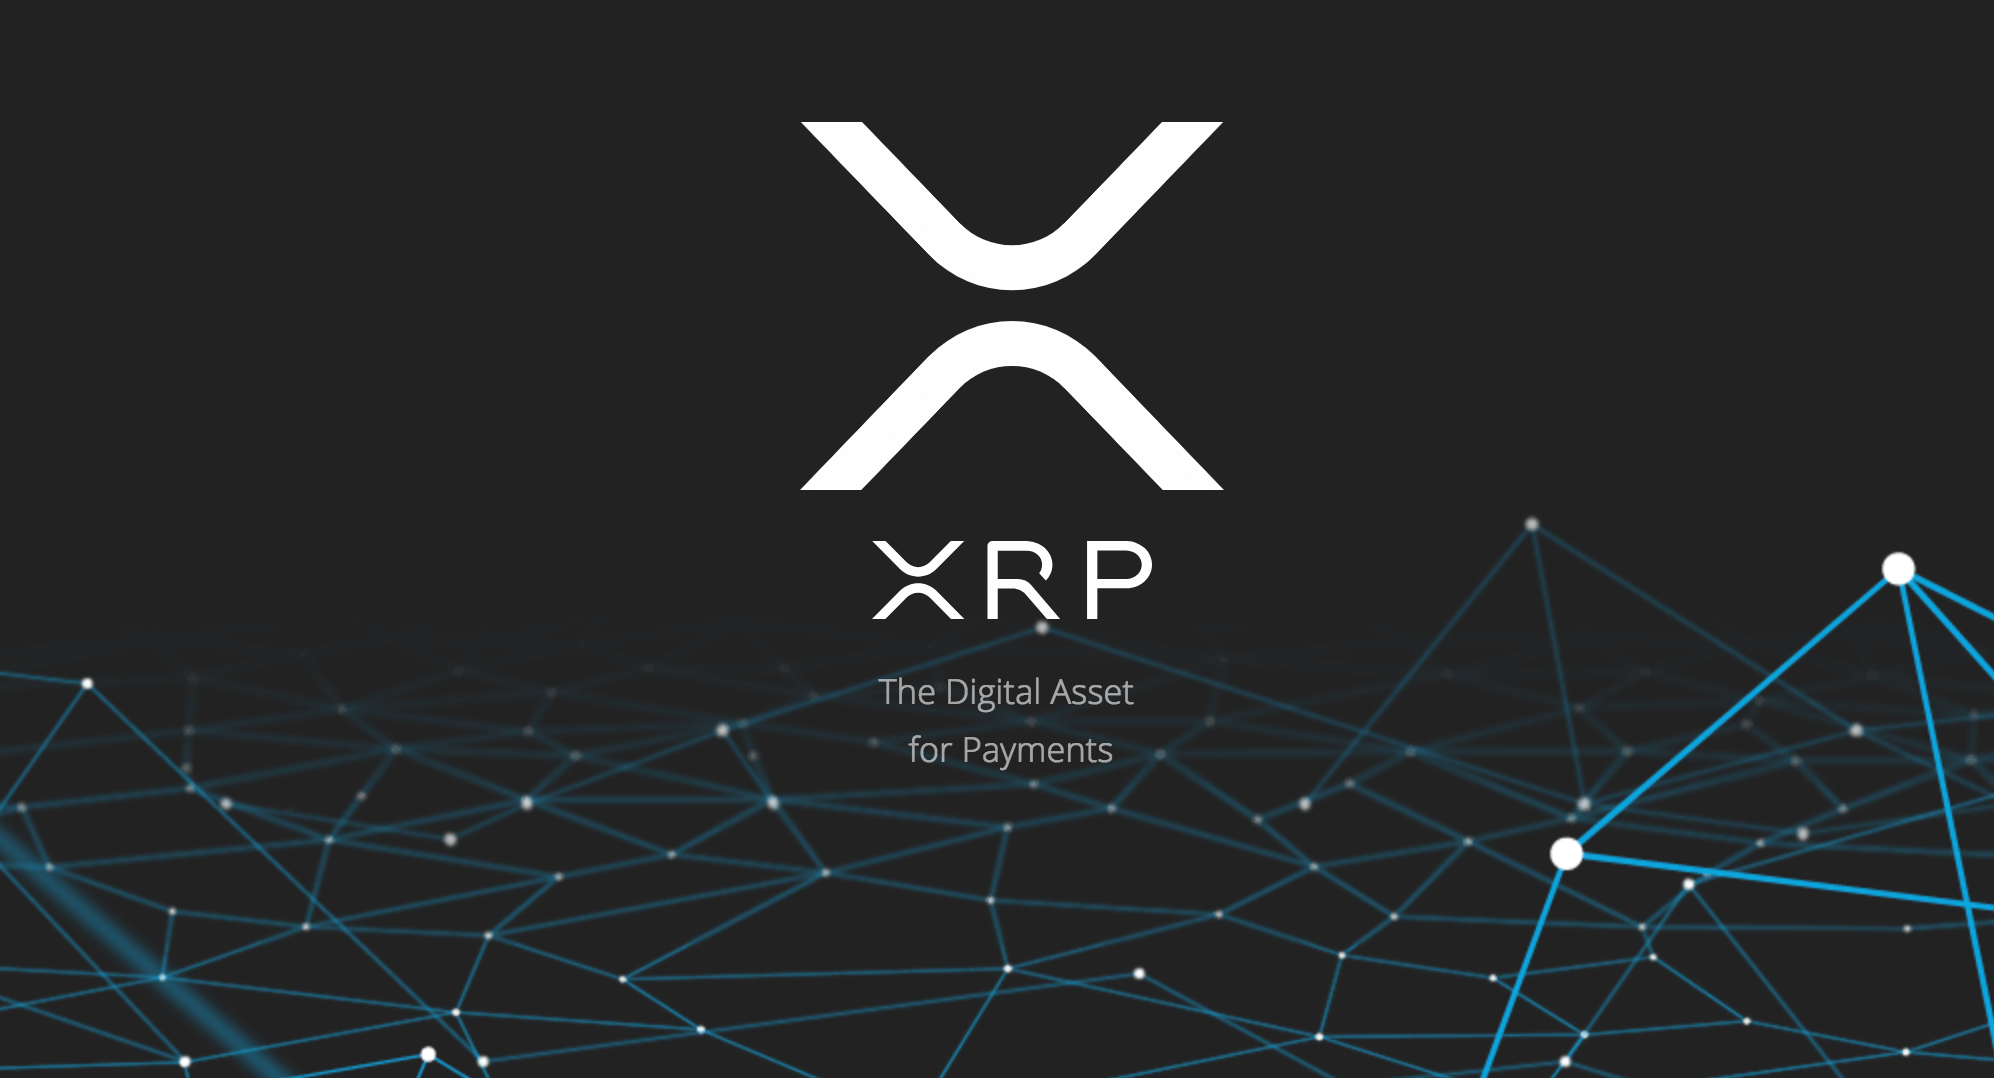 Should I Invest In Xrp 2020 - #95 XRP Rich - How Many XRP Should I Own? - Do Your Own ... - In five years, they predict this cryptocurrency to trade at $0.029 in february 2025.